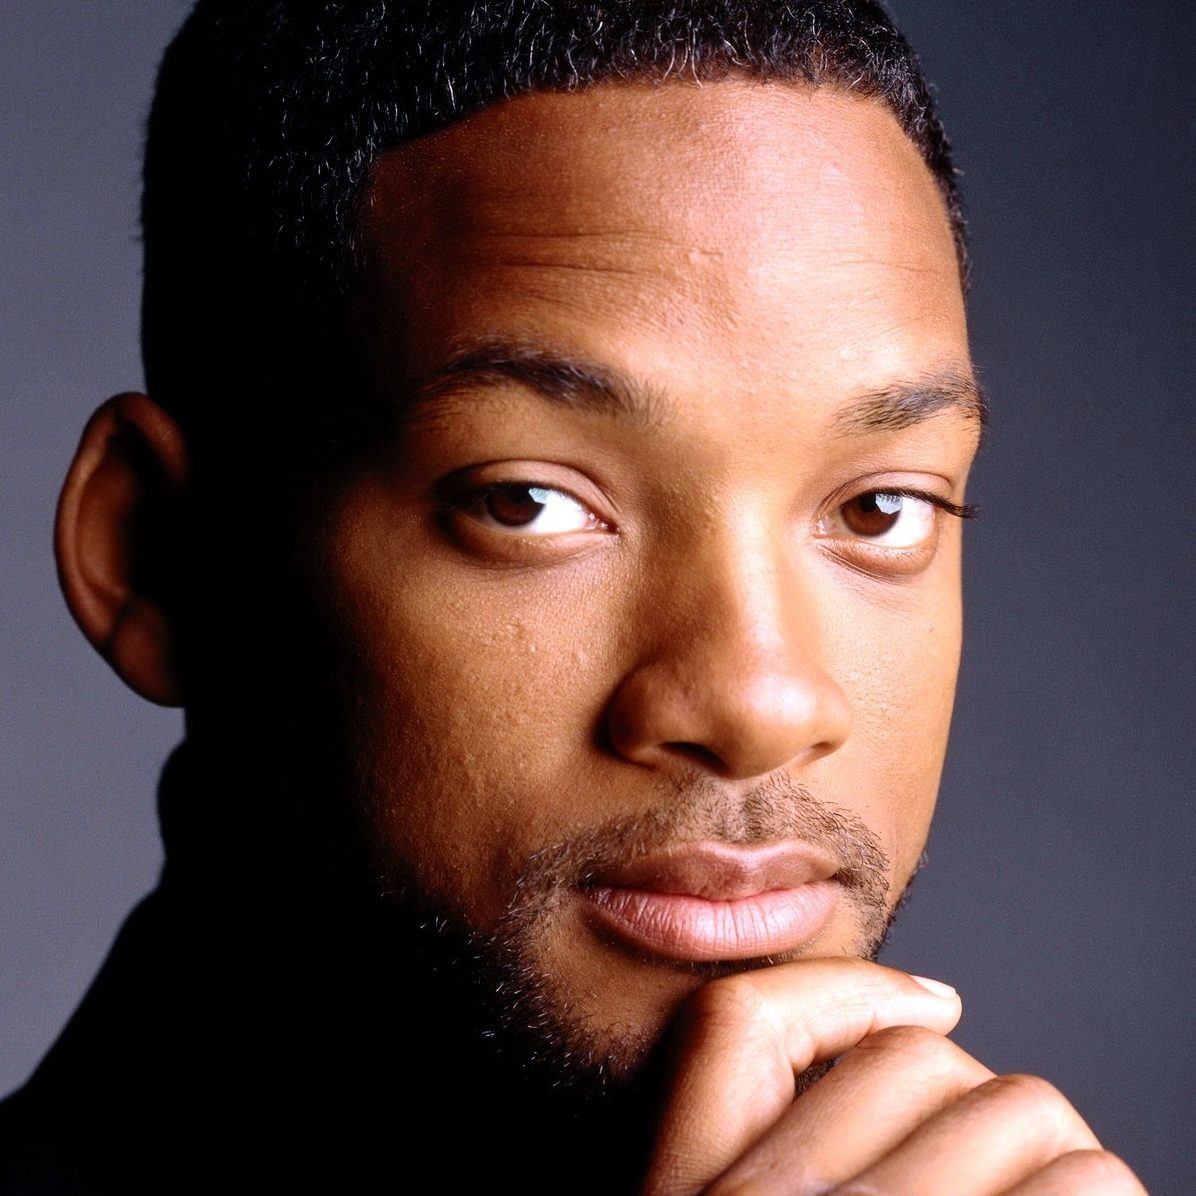 WILL SMITH | His Journey | Achievements | Personal Life